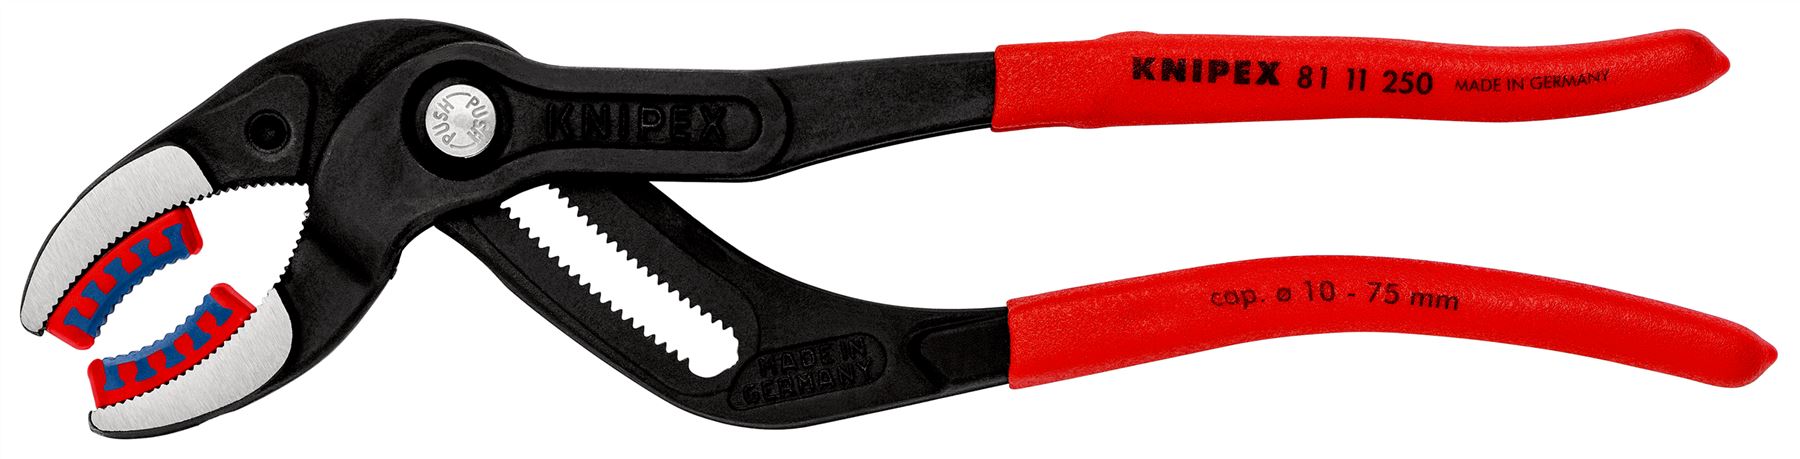 KNIPEX Siphon and Connector Pliers Plastic Jaws for Traps Tube Fittings Connectors 250mm Plastic Coated 81 11 250 SB